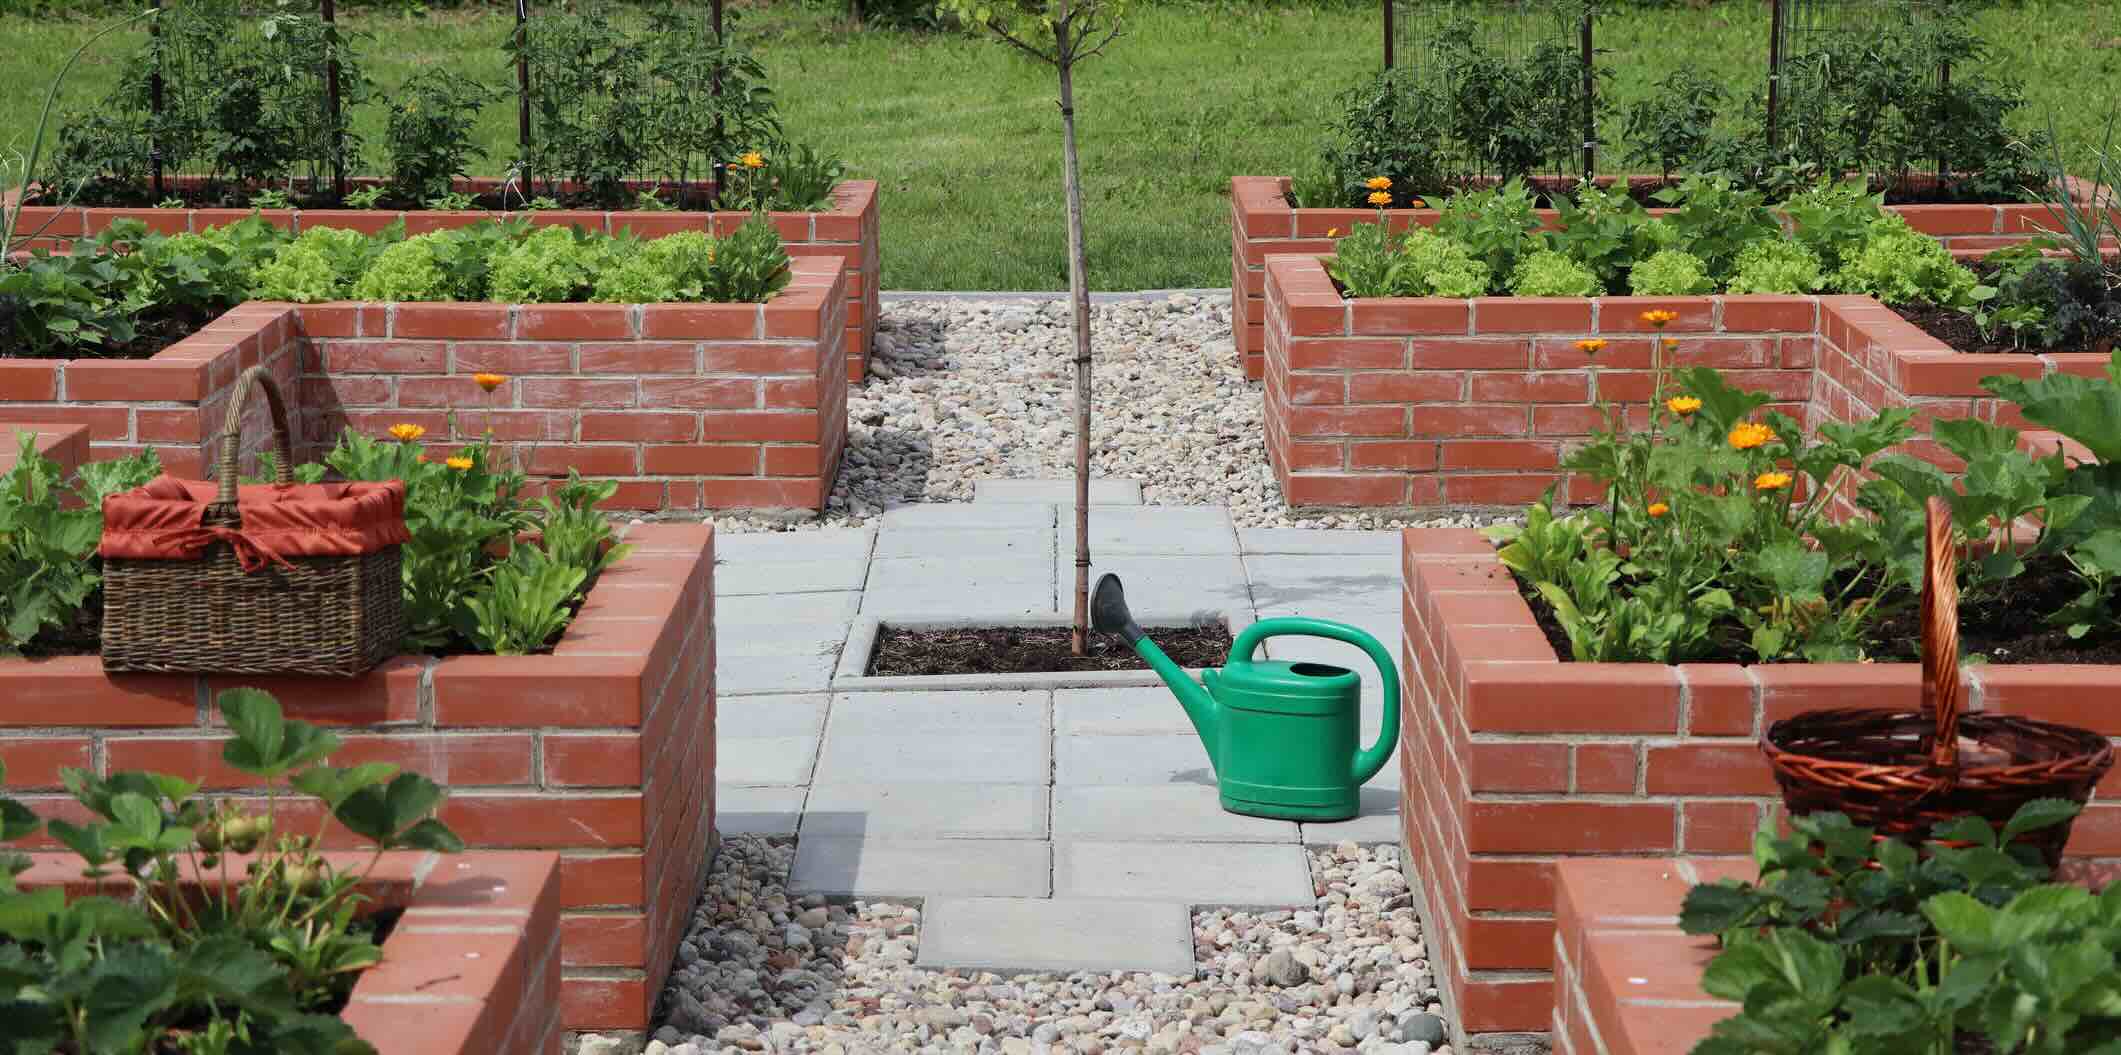 How To Make A Raised Garden Bed With Bricks